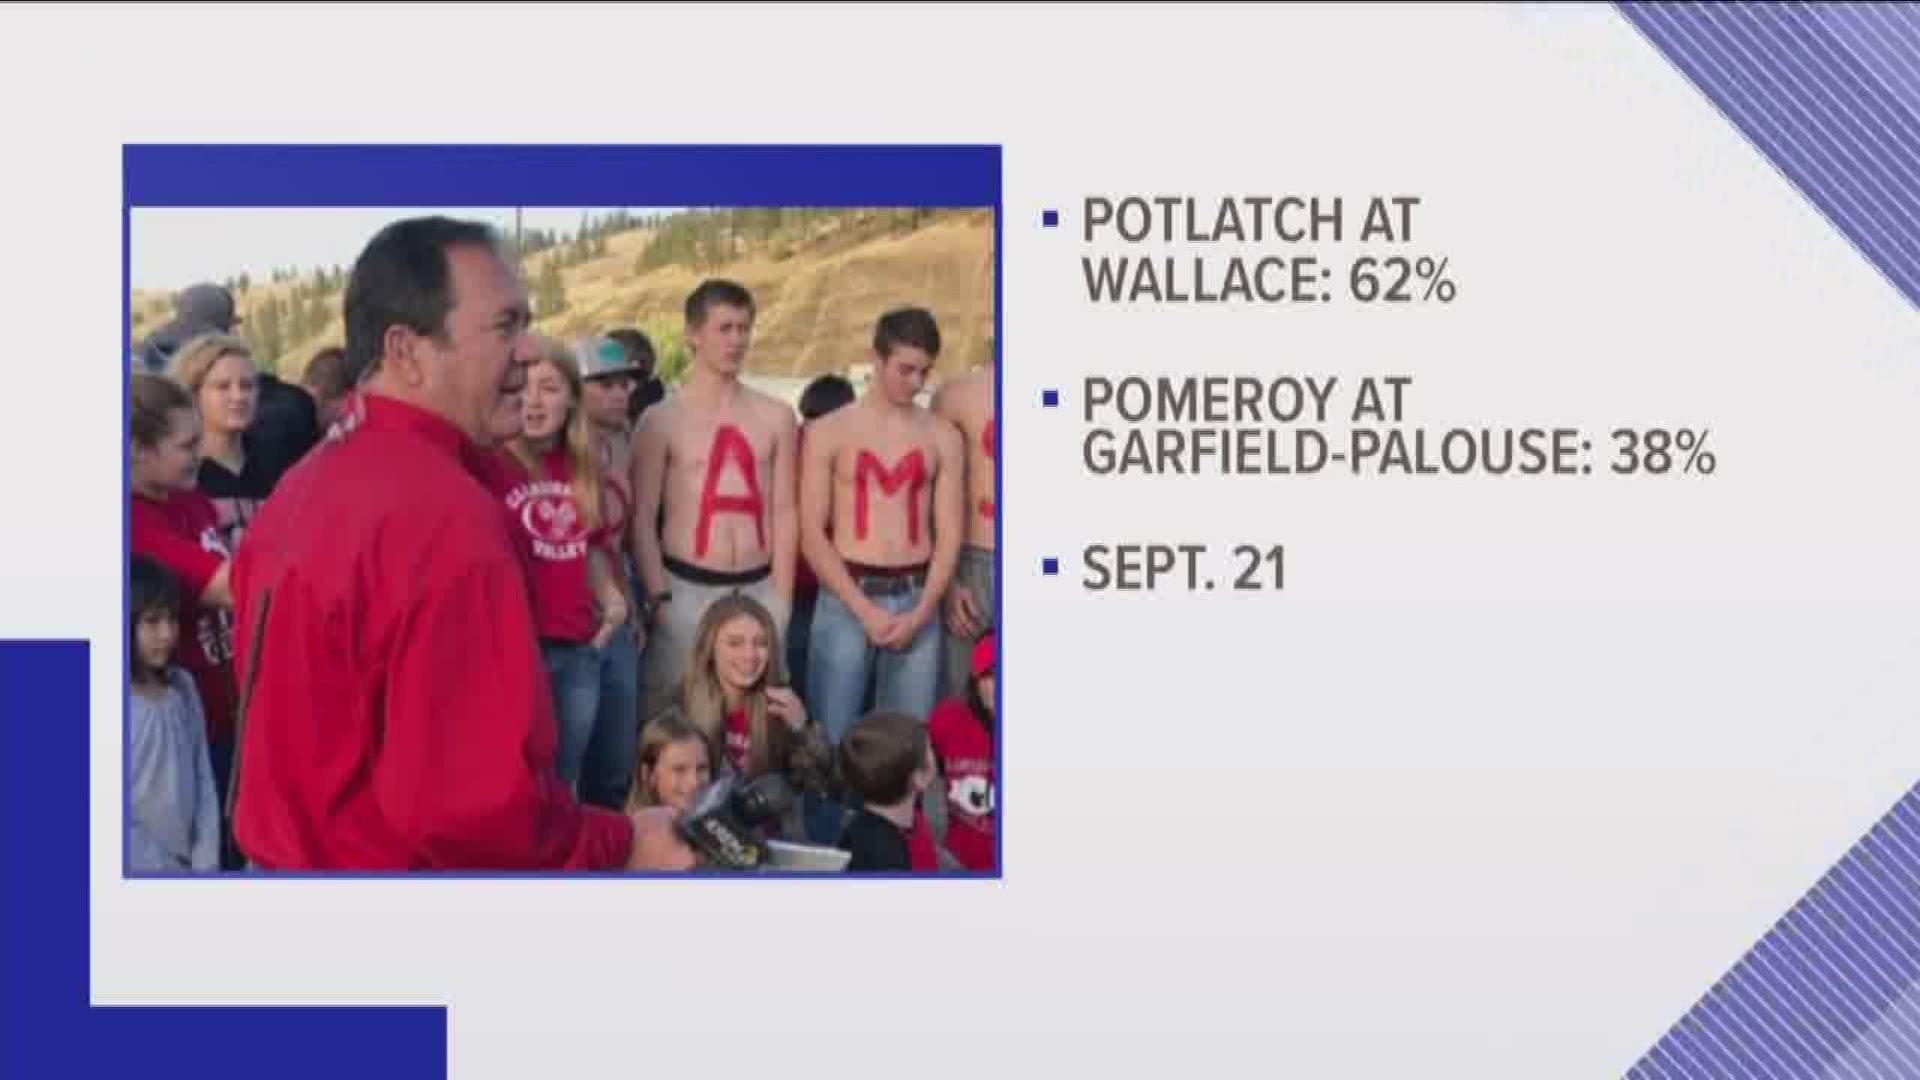 Tom's Tailgate weather is going to Potlatch at Wallace Sept. 21